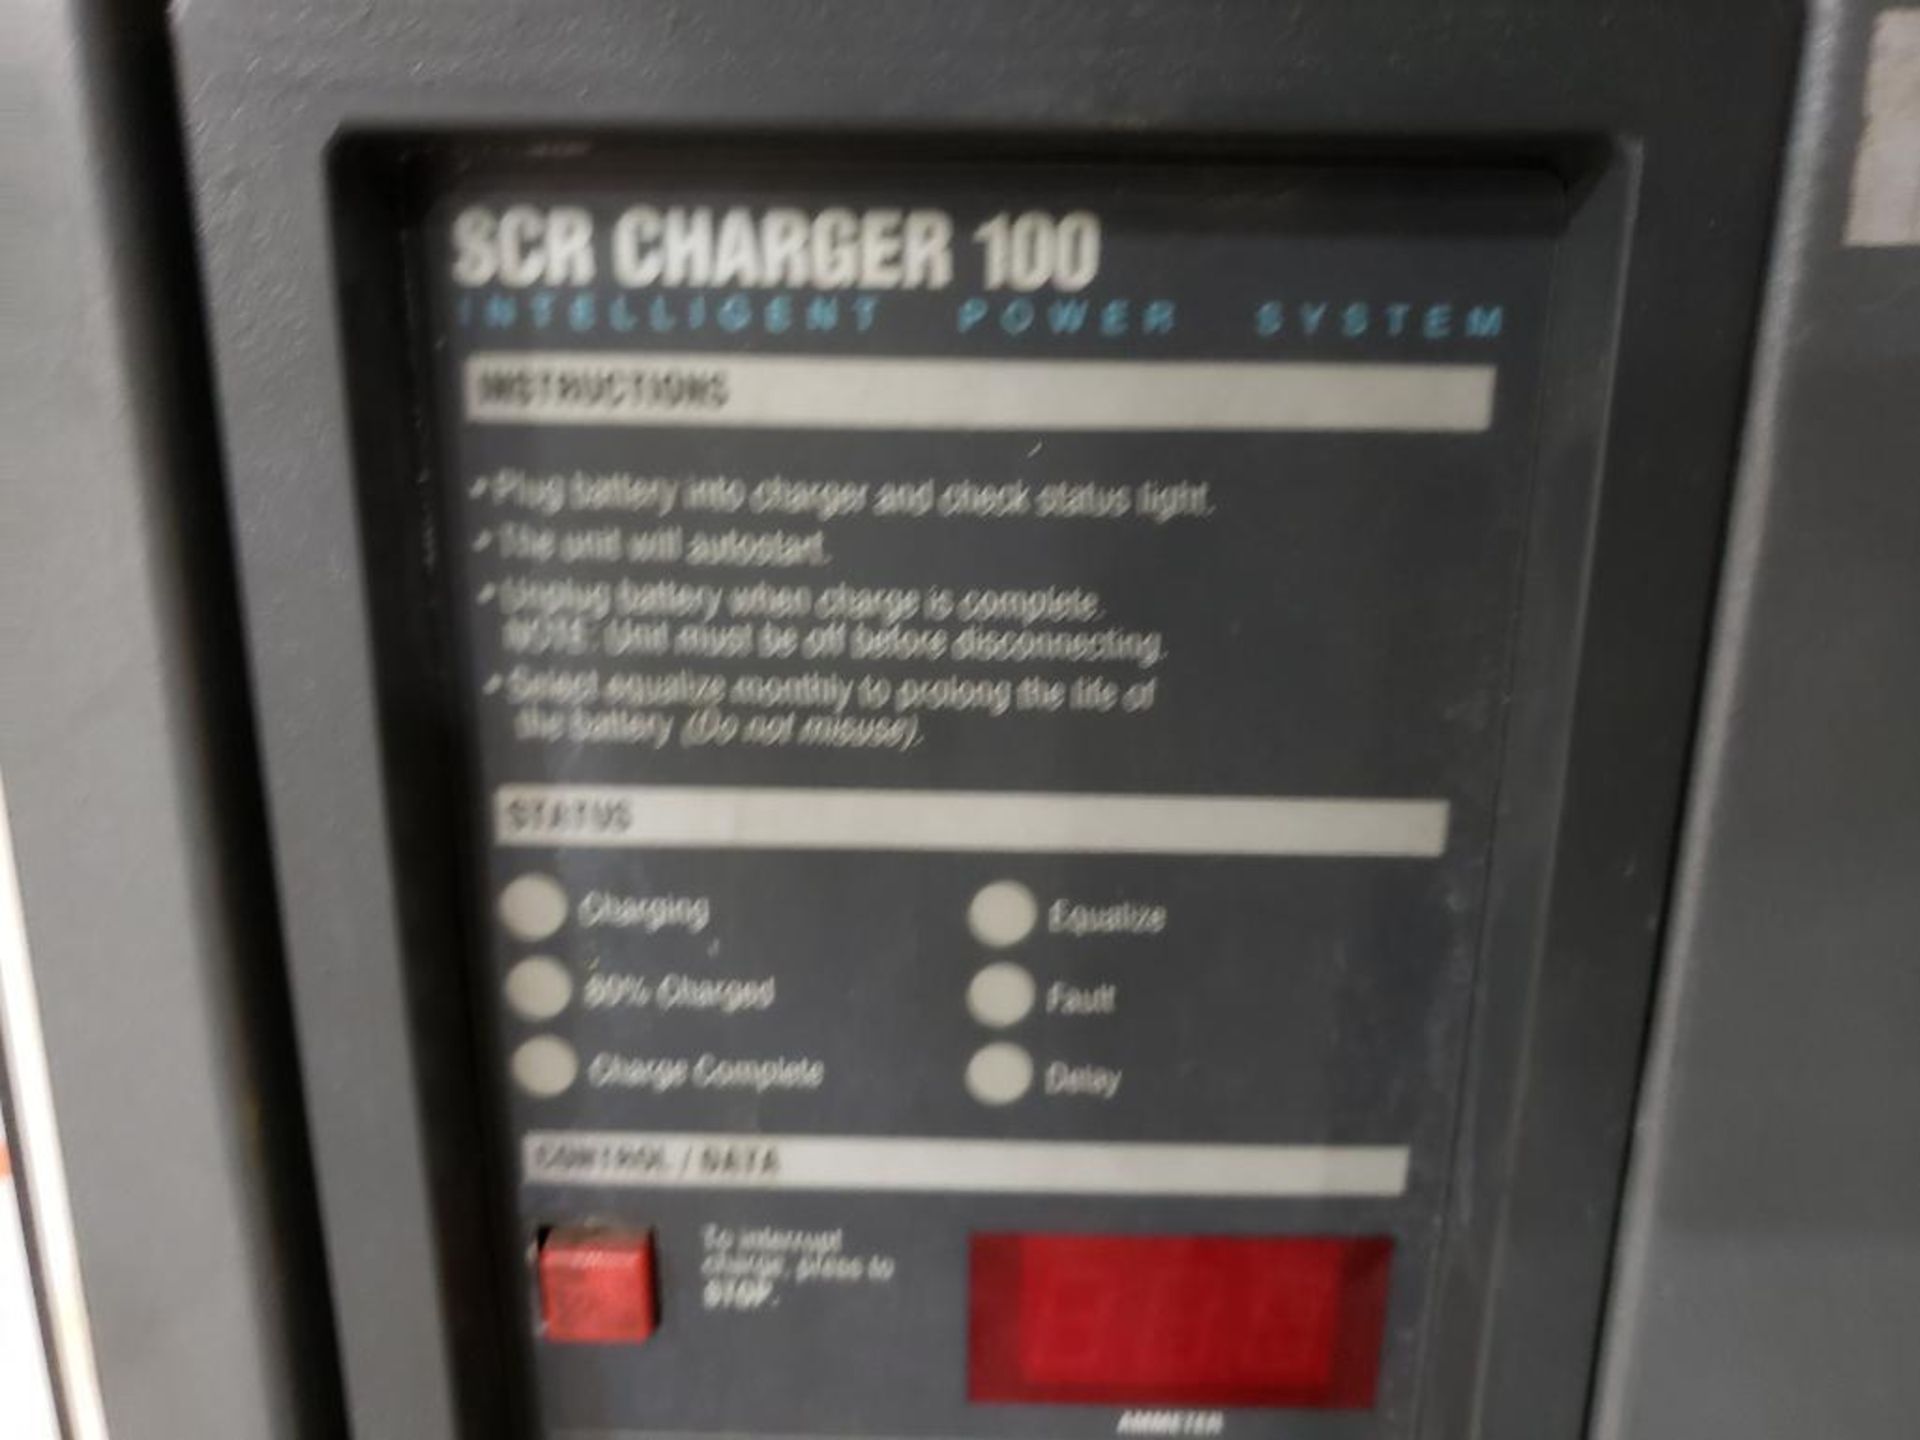 SCR Charger 100 intelligent power SCR100-18-750T1. 18-Cell, 3PH 208/240/480 IN, 36VDC OUT. 750AH. - Image 3 of 5